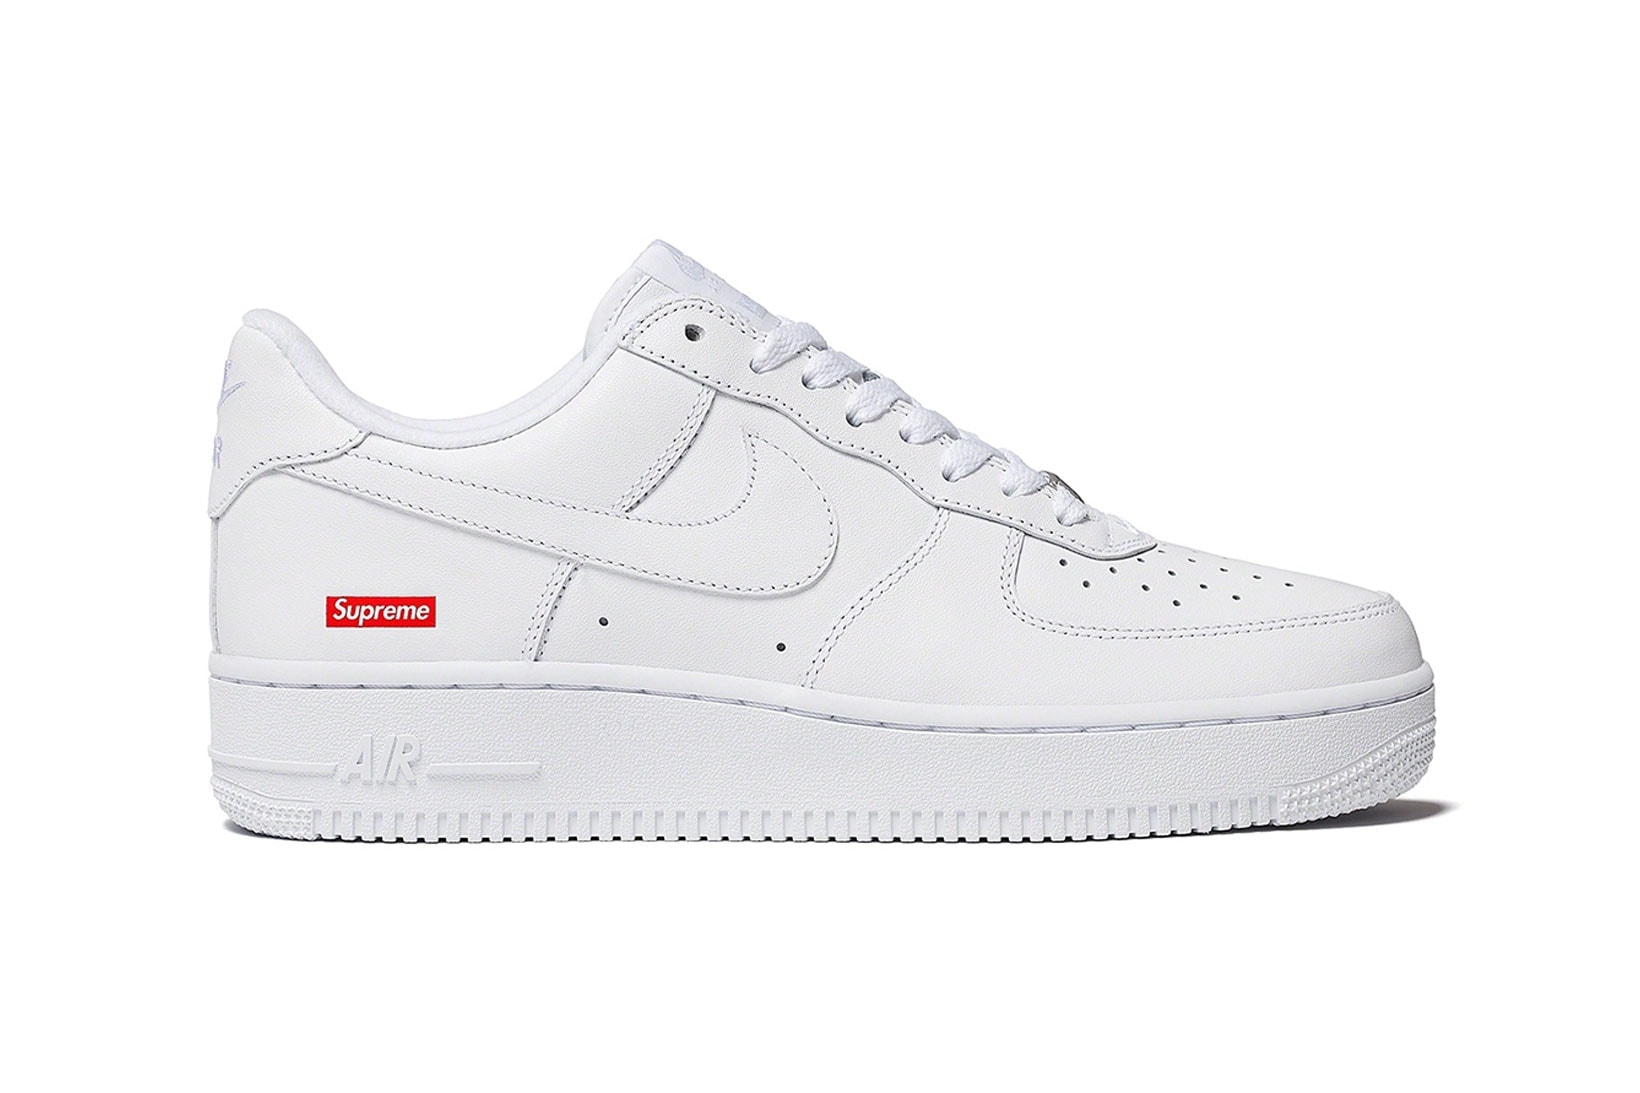 The Supreme x Nike Air Force 1 is Scheduled for Release in the SS20